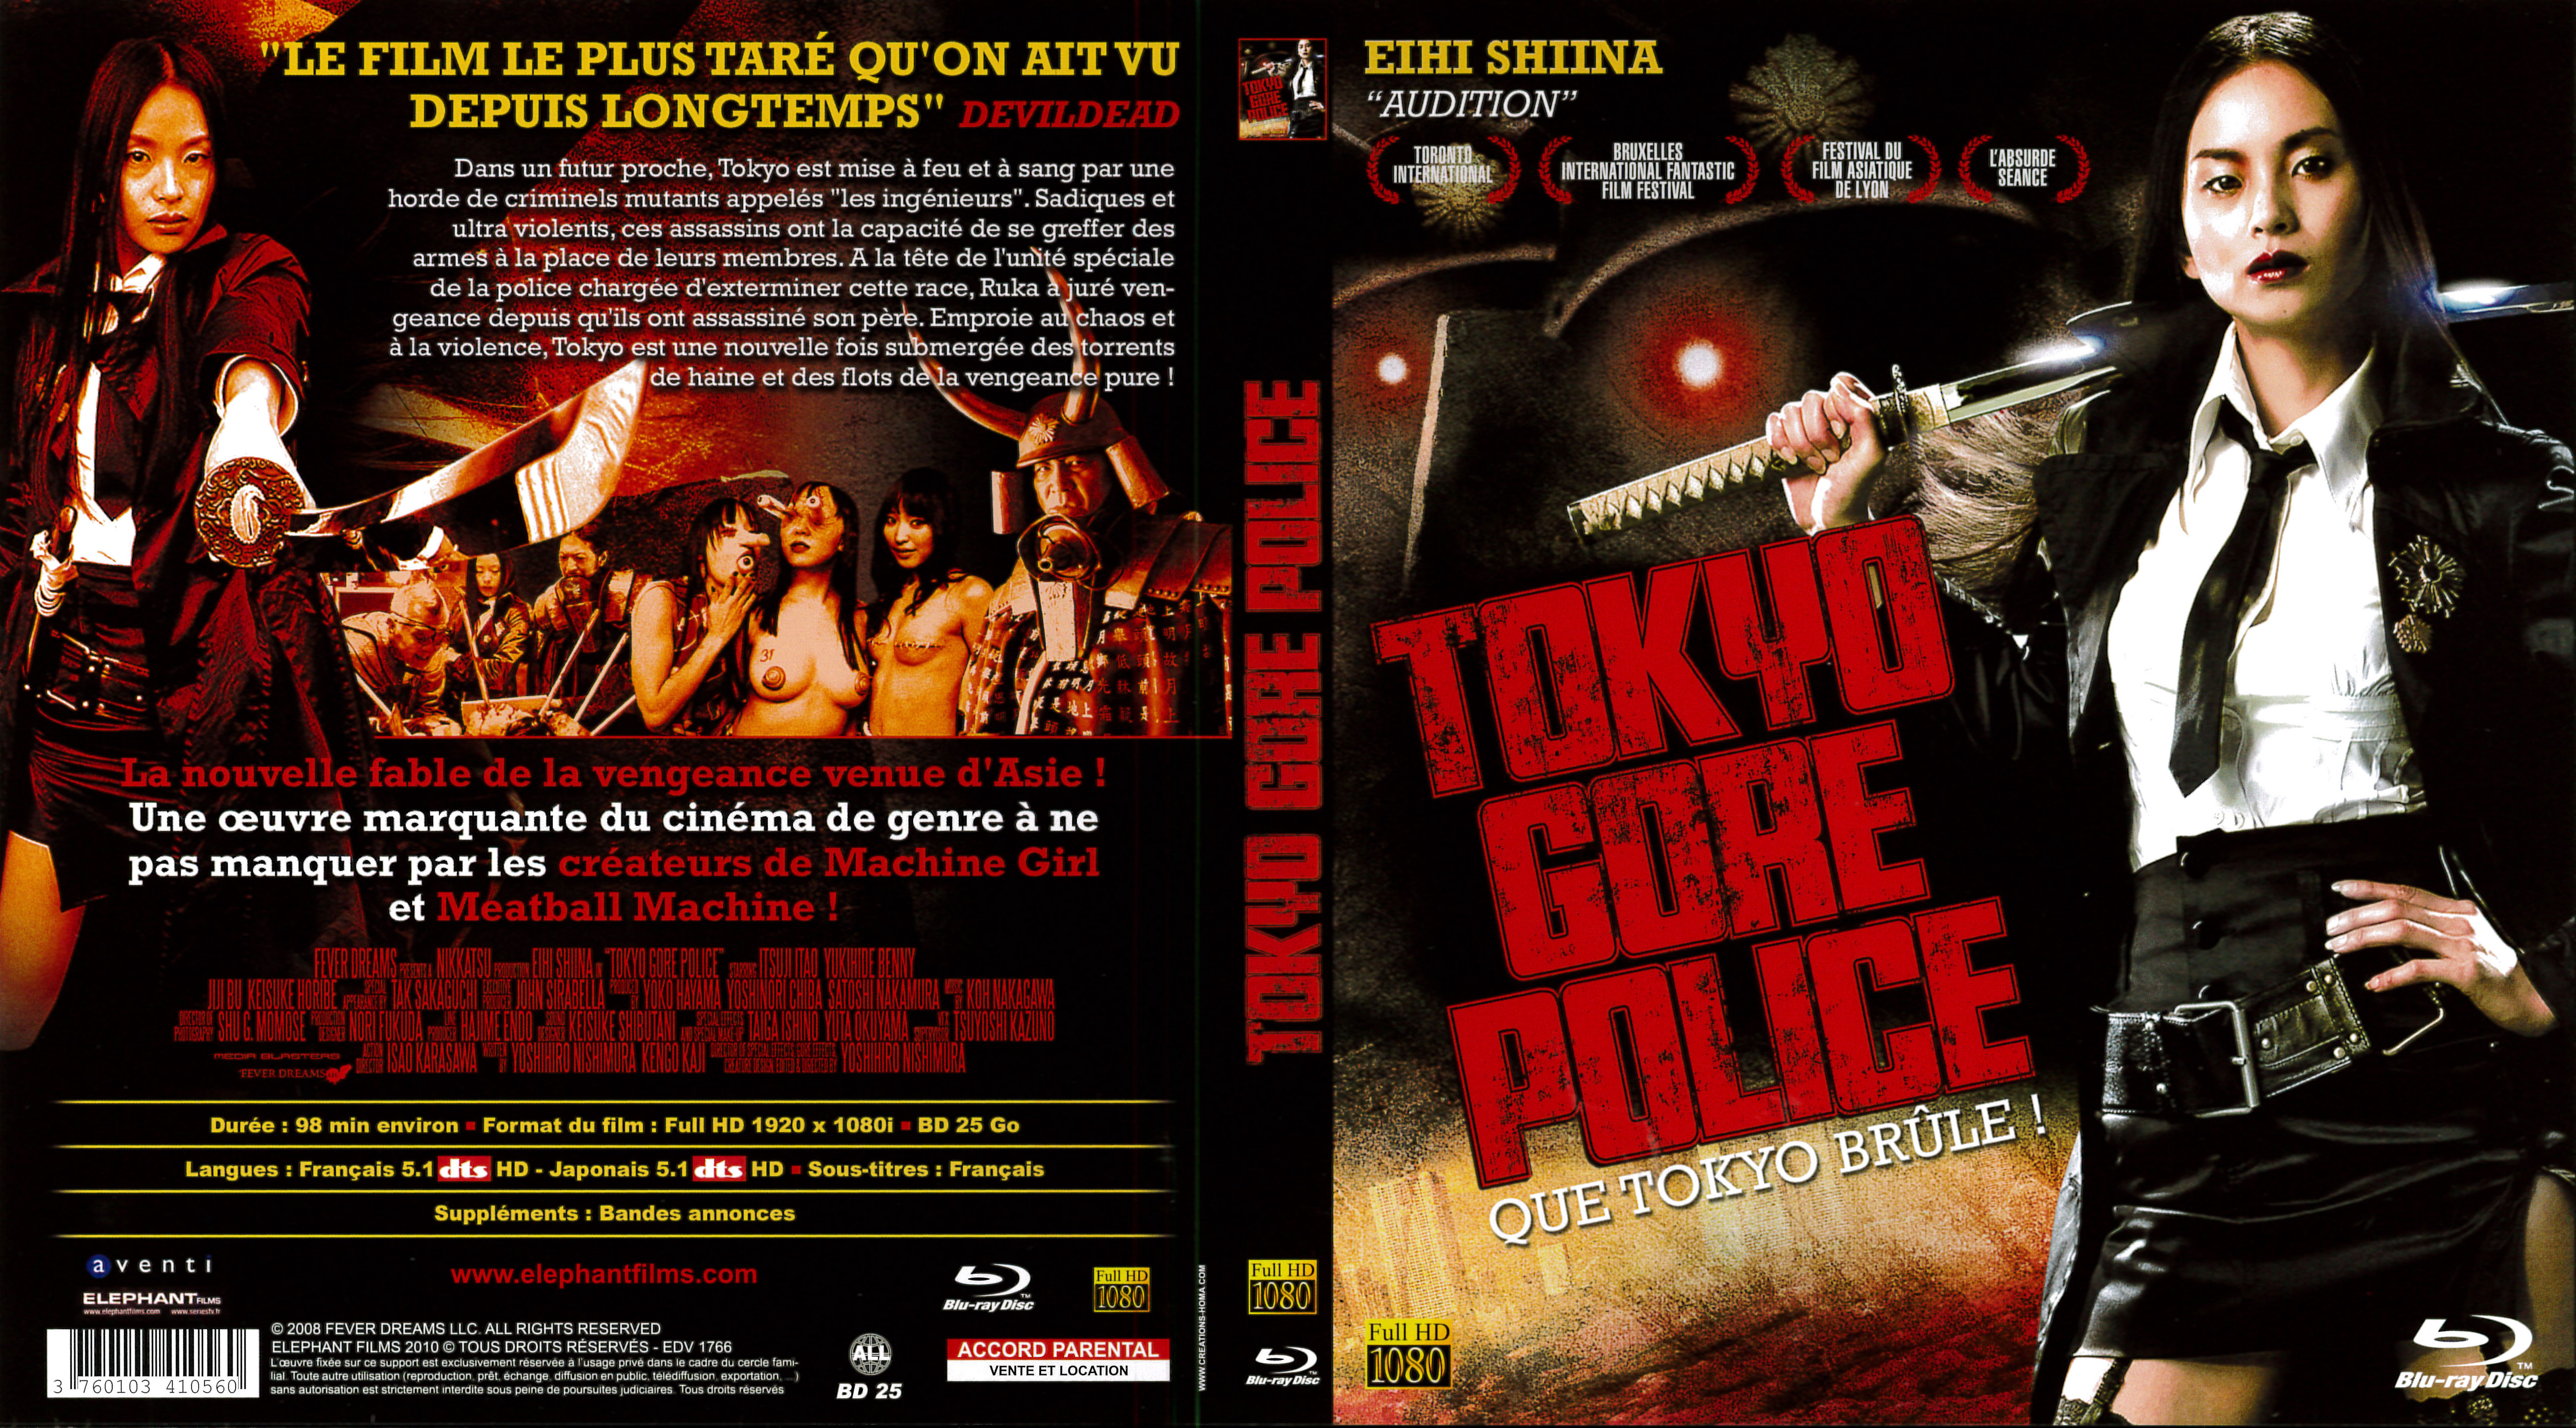 Jaquette DVD Tokyo gore police (BLU-RAY)